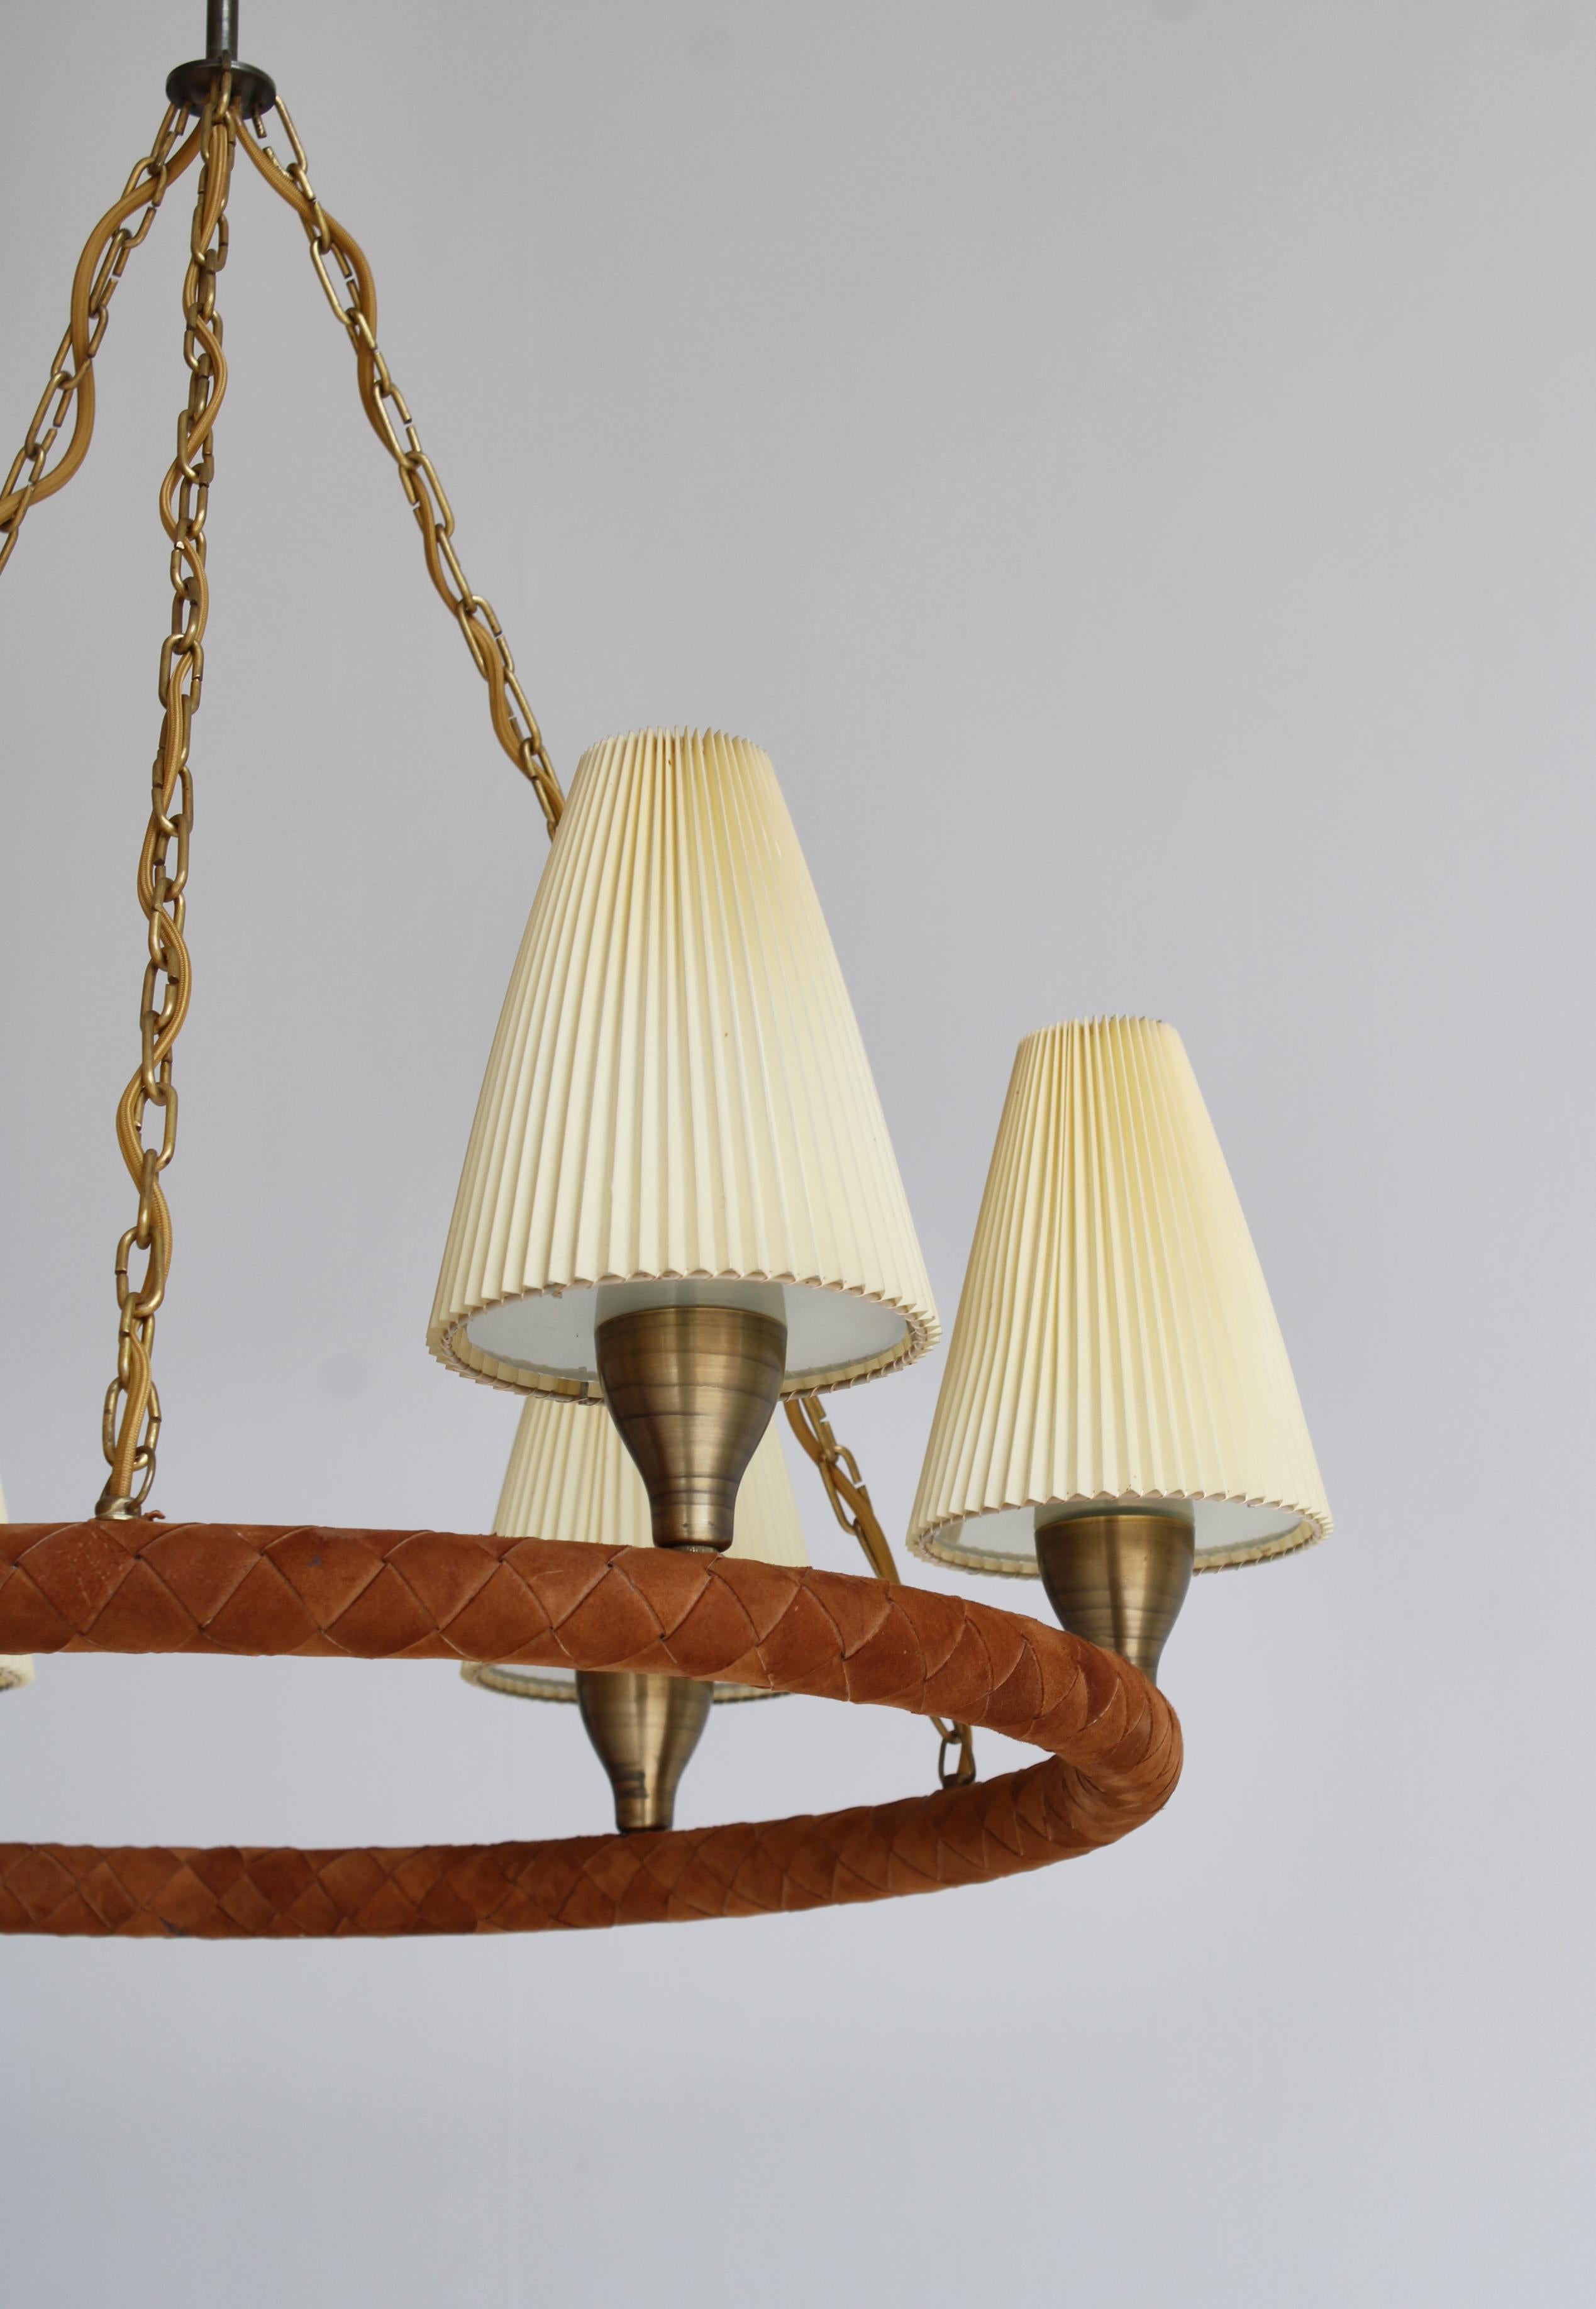 Mid-20th Century Danish Modern Chandelier in Leather, Brass and Glass by LYFA, Denmark, 1940s For Sale